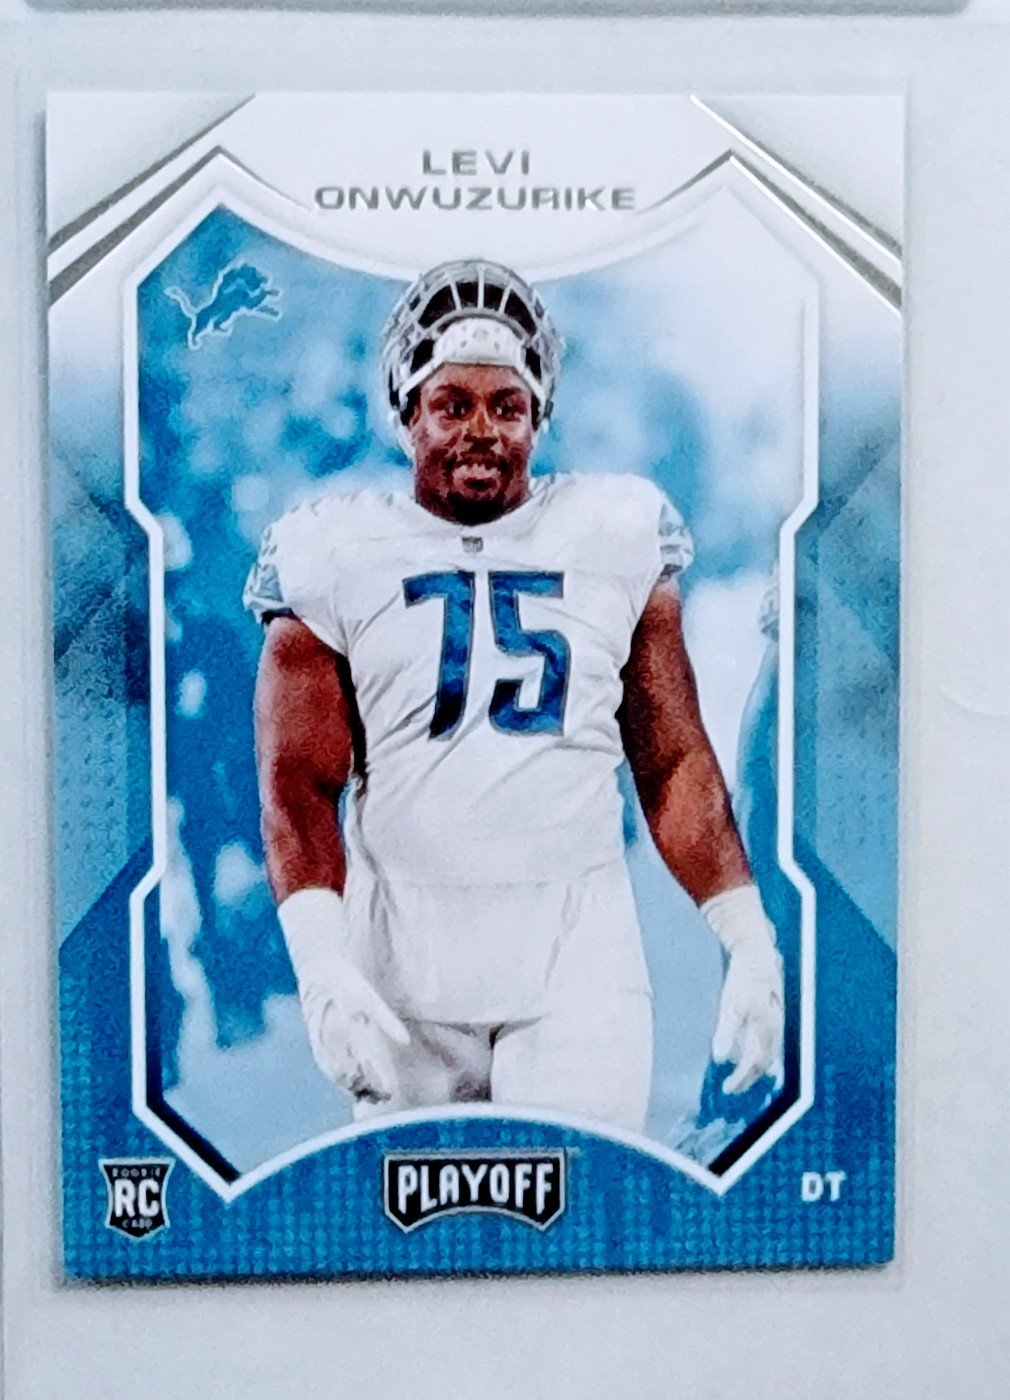 2021 Panini Playoffs Levi Onwuzurike Rookie Football Card AVM1 simple Xclusive Collectibles   